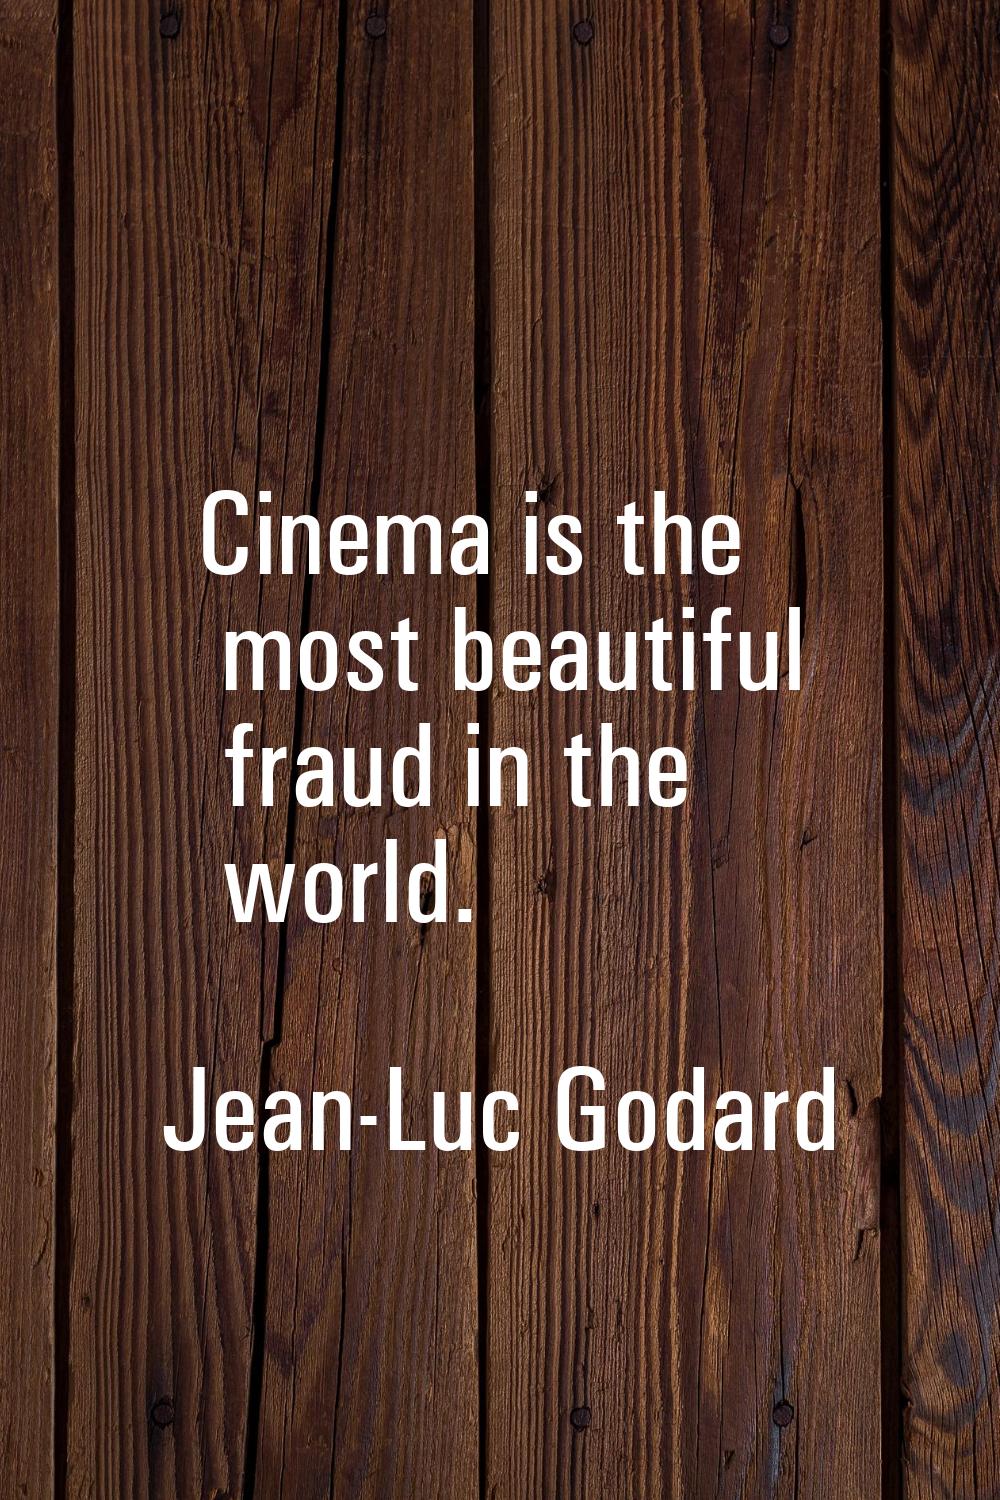 Cinema is the most beautiful fraud in the world.